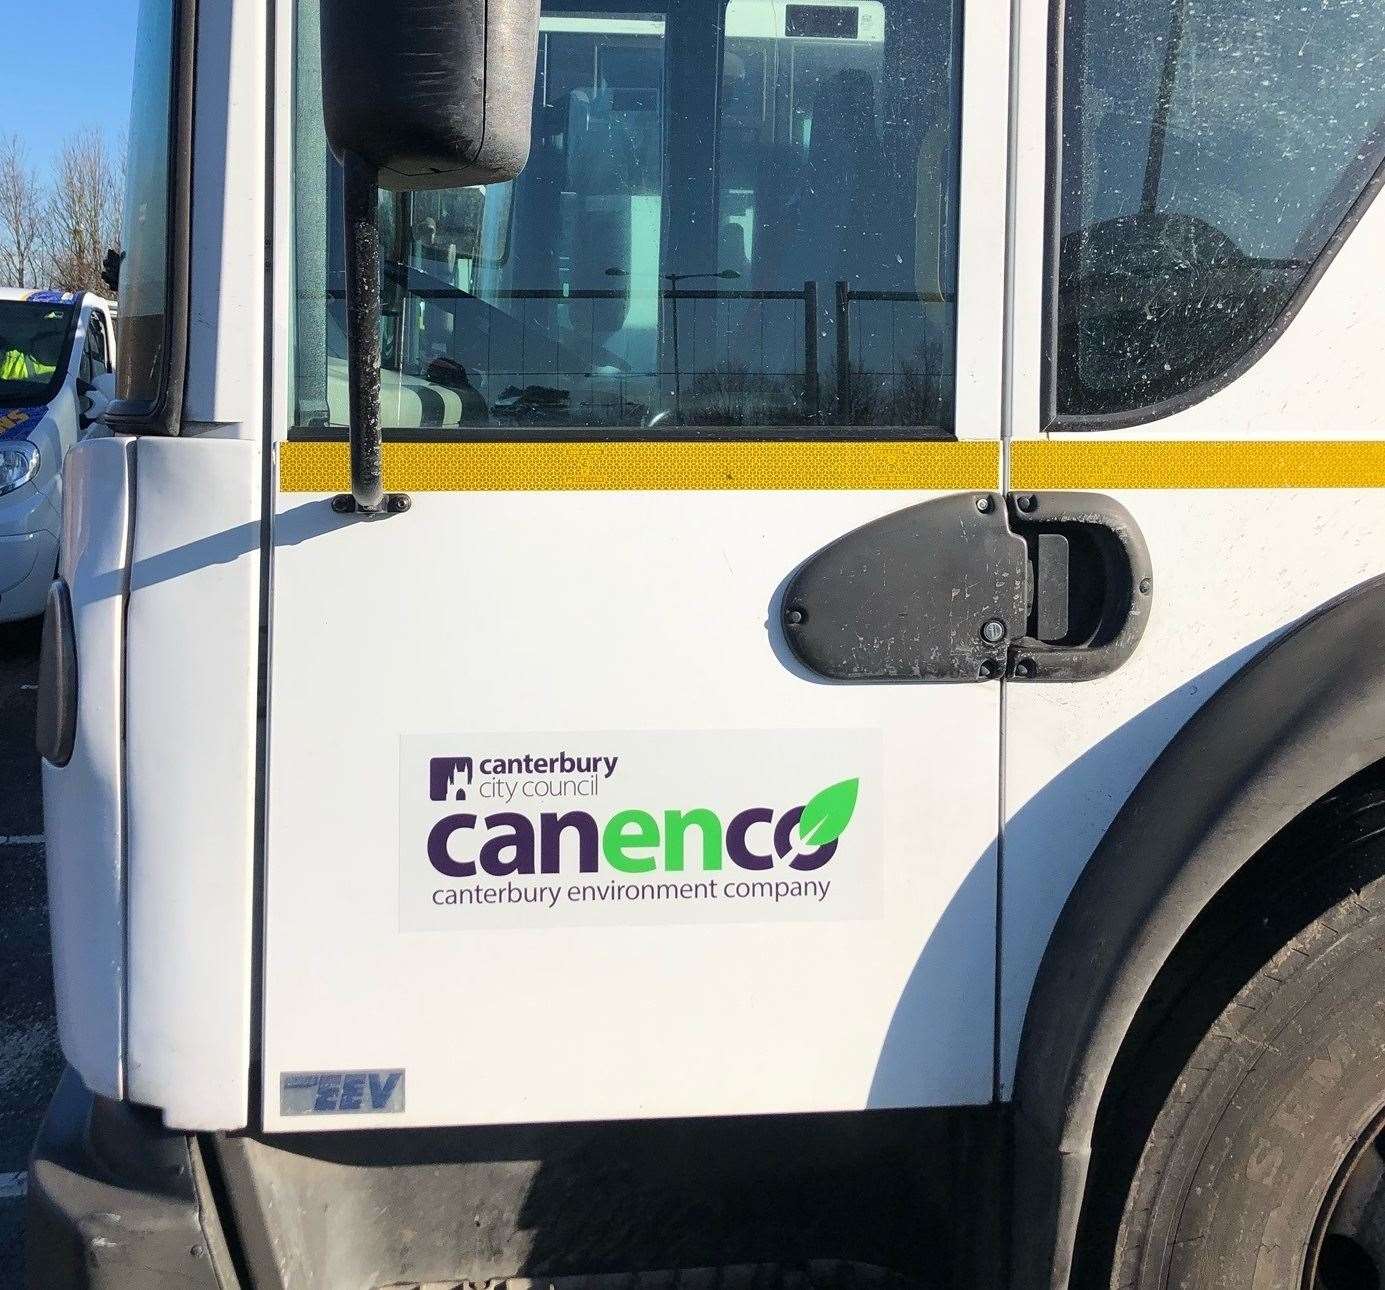 The Canenco branding has started appearing on dustcarts since the firm took over collections this month